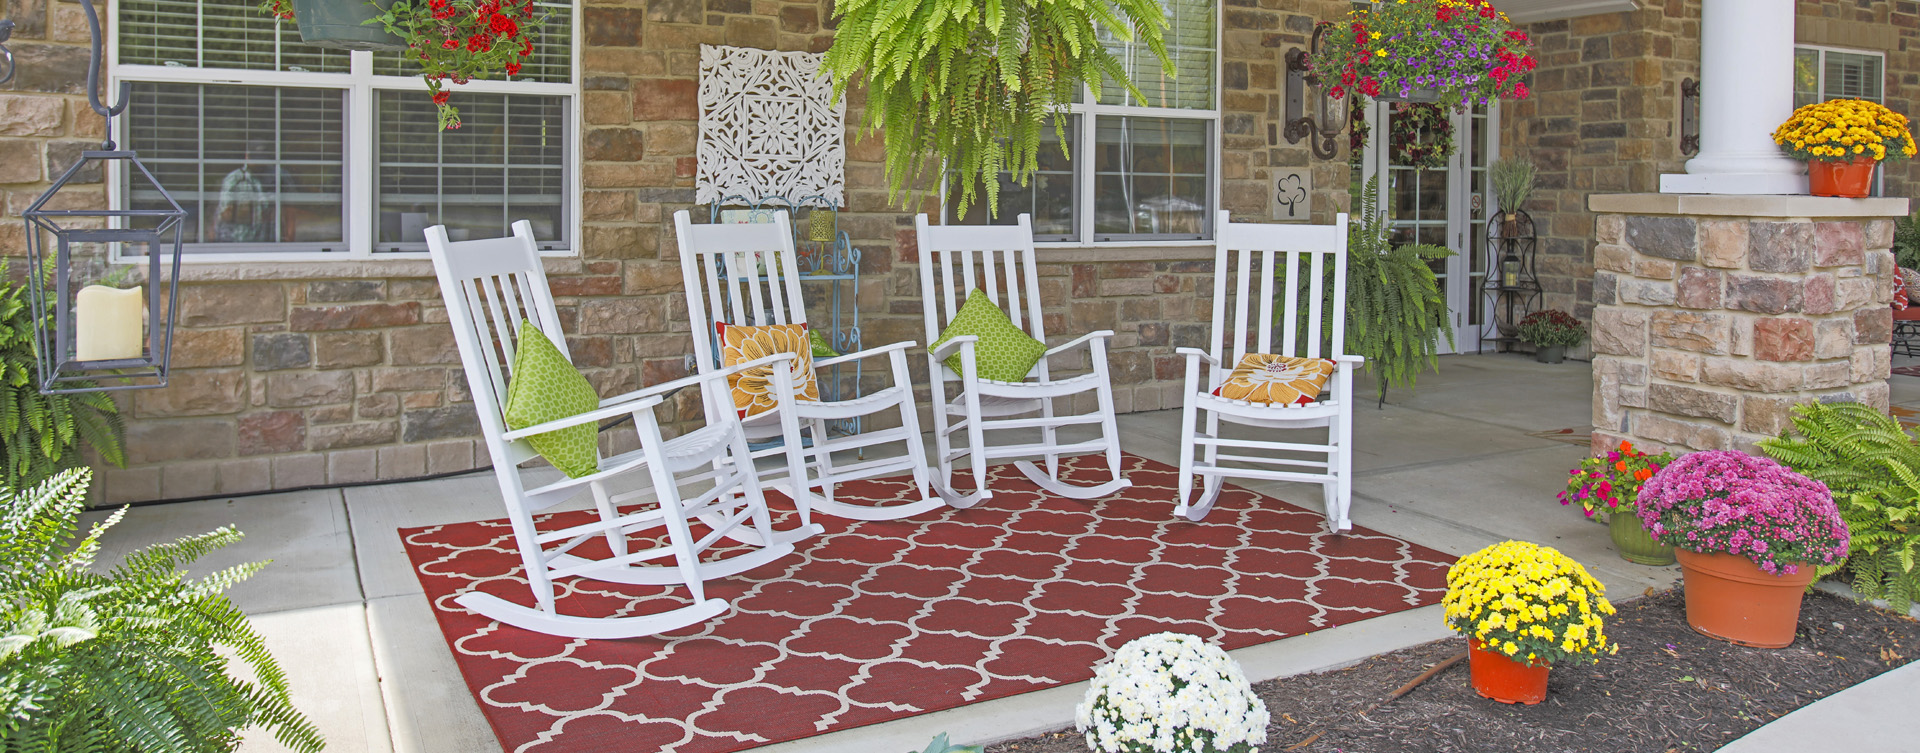 Relax in your favorite chair on the porch at Bickford of Carmel